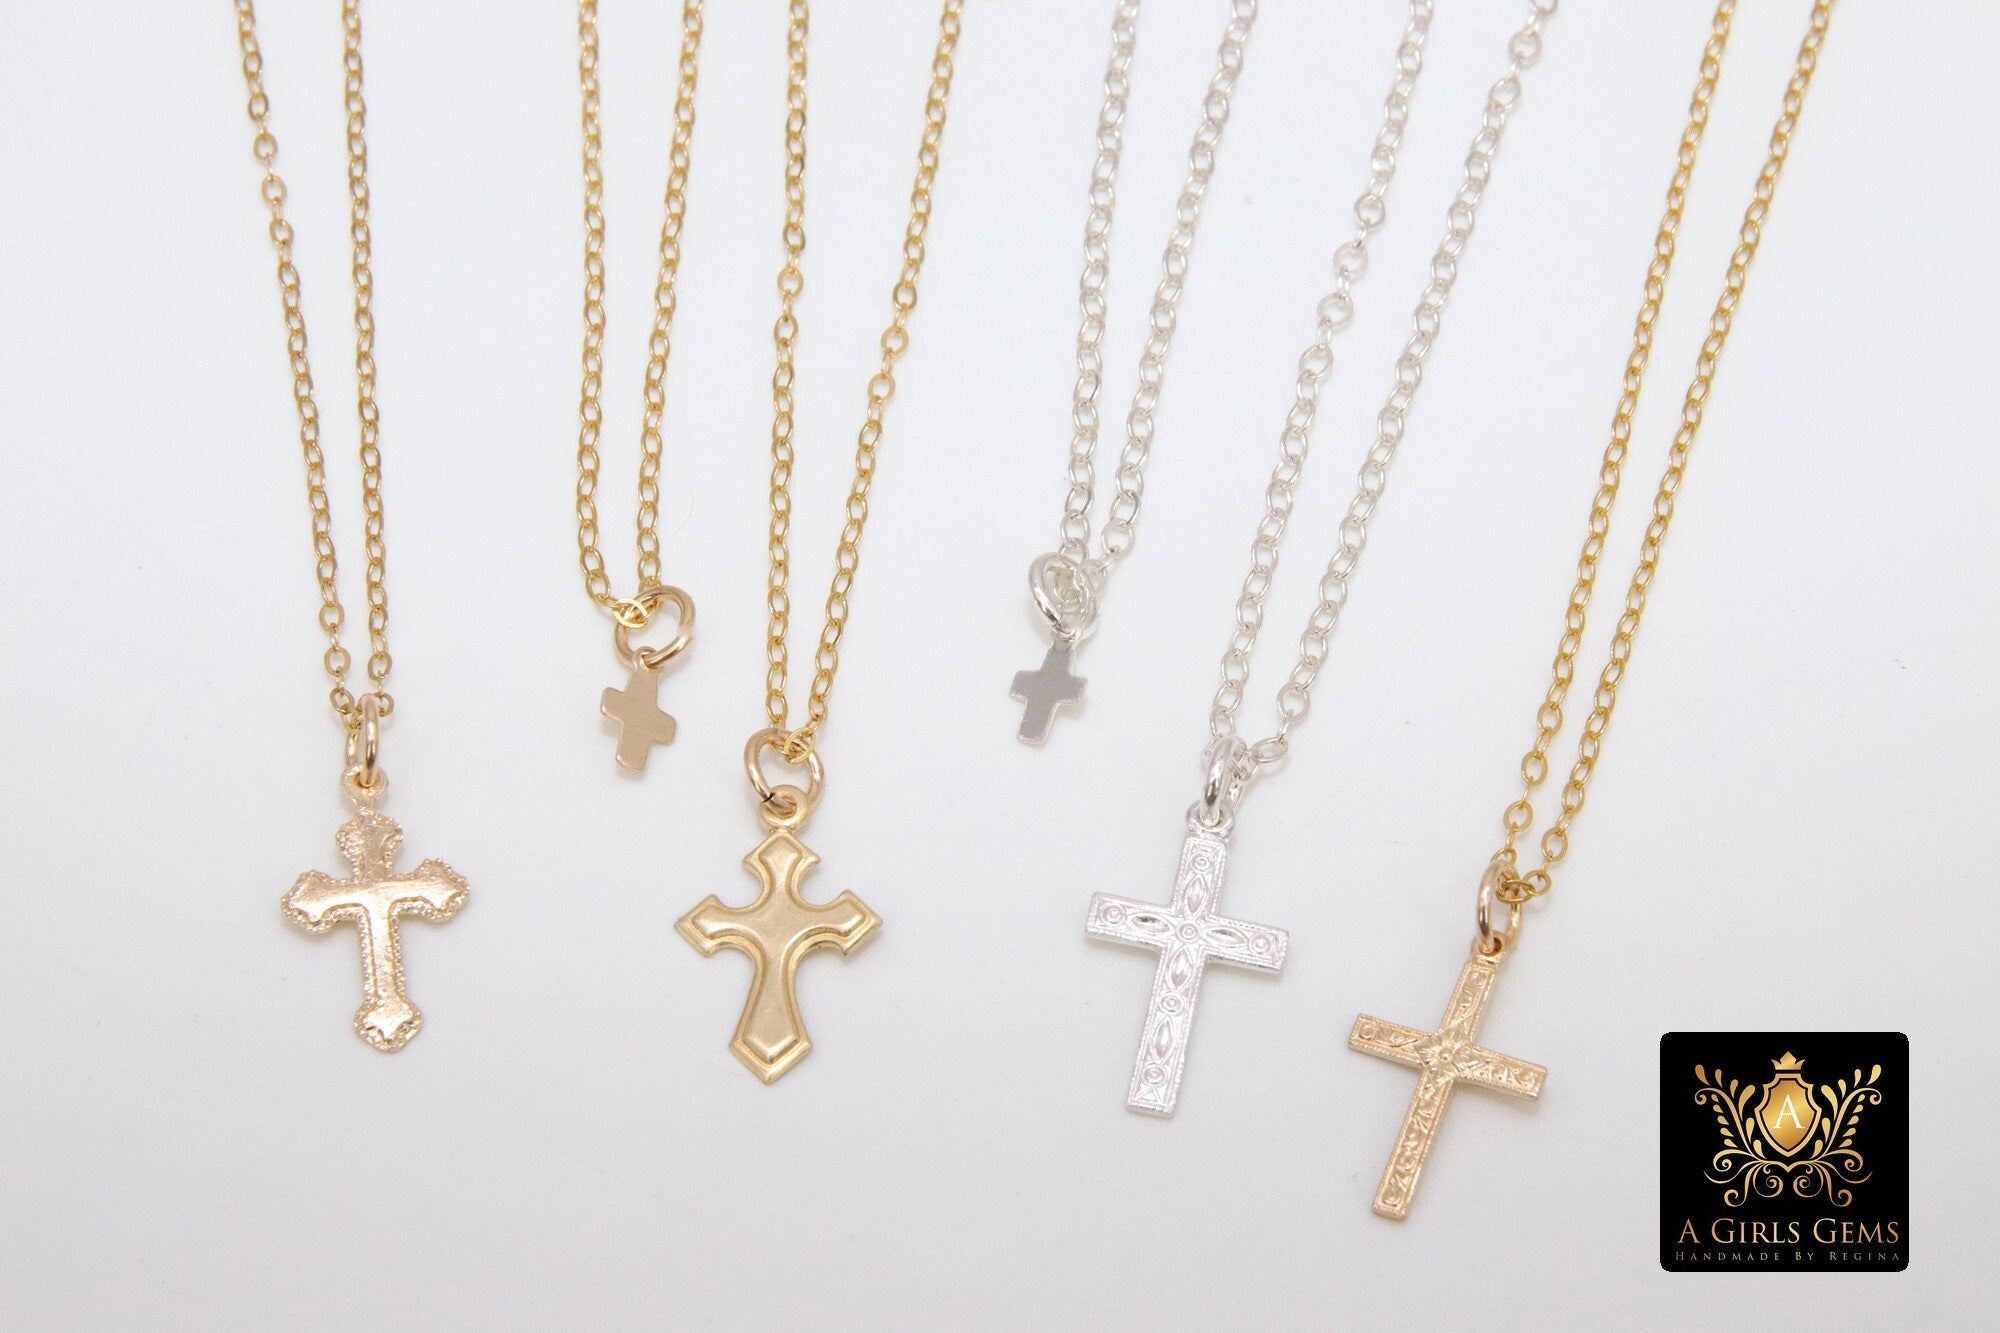 14 K Gold Filled Cross Hammered Chain Necklace, 925 Sterling Silver Crucifix Choker, Religious Mommy and Me Necklaces - A Girls Gems